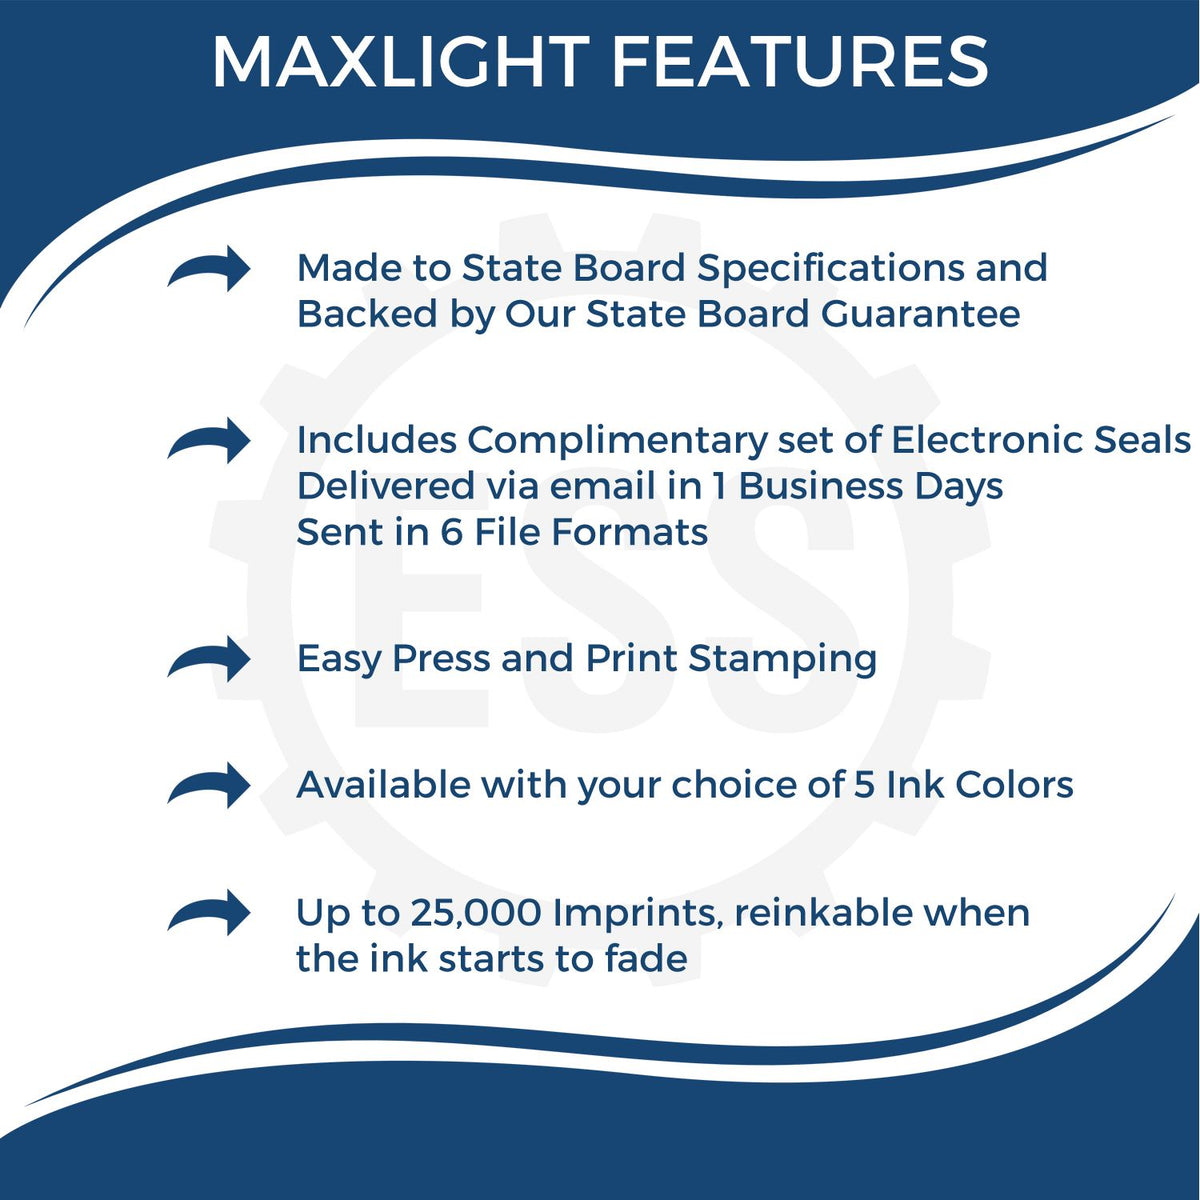 A picture of an infographic highlighting the selling points for the Premium MaxLight Pre-Inked Minnesota Geology Stamp